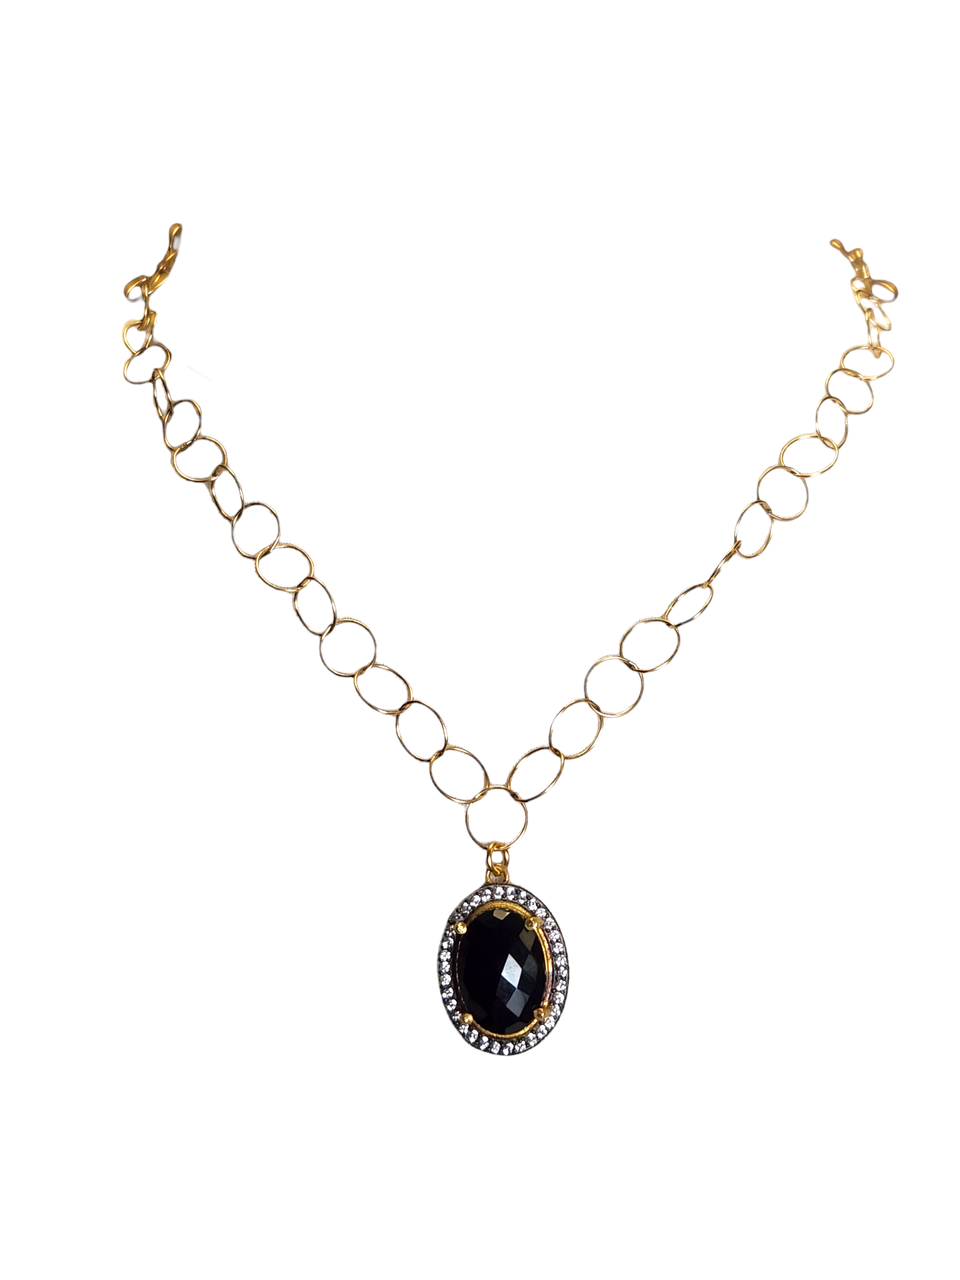 The Olga Faceted Onyx Necklace